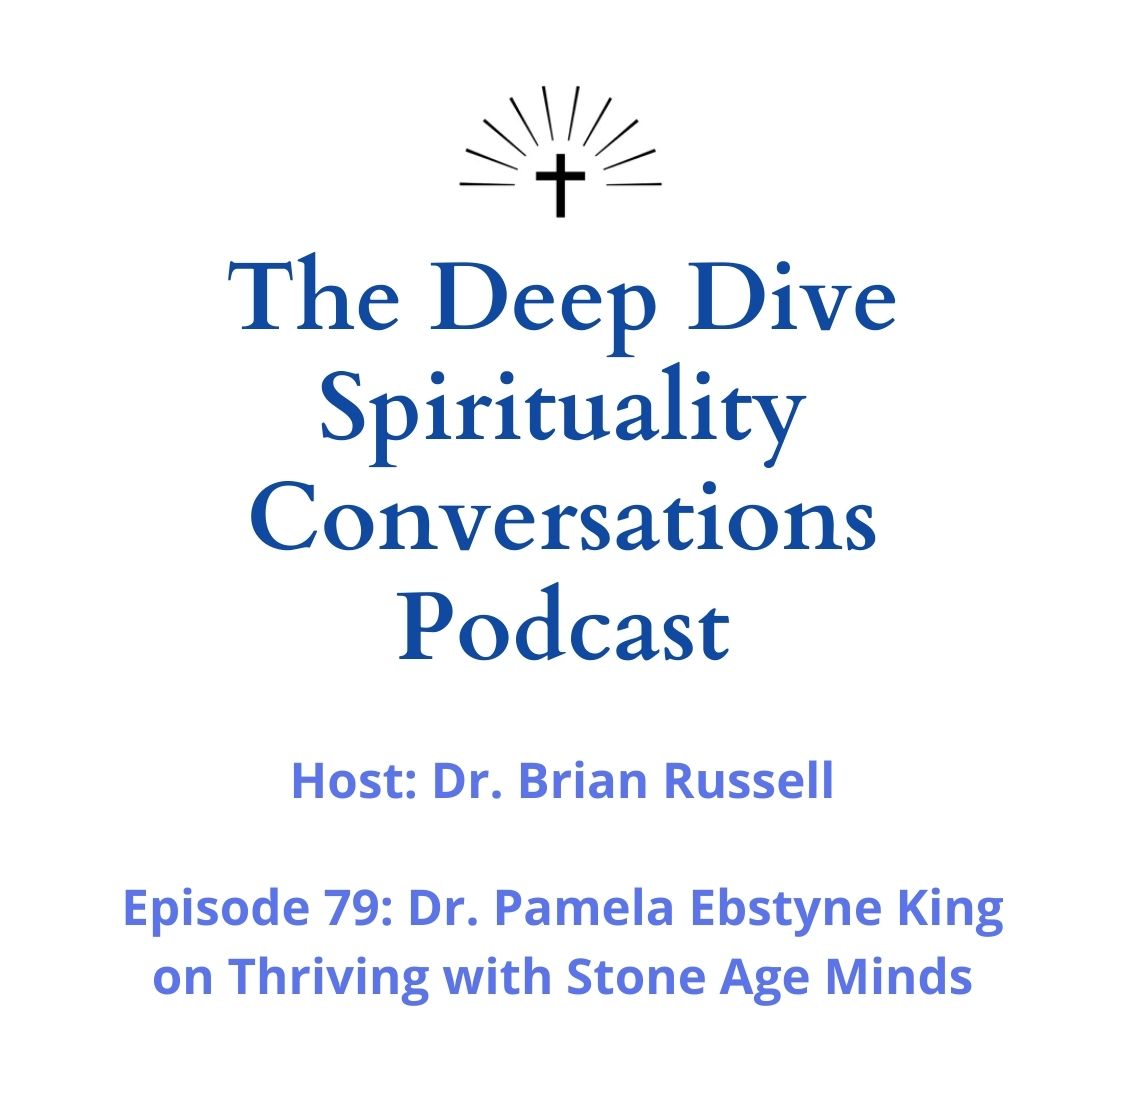 The Deep Dive Spirituality Conversations Podcast, Ep 79